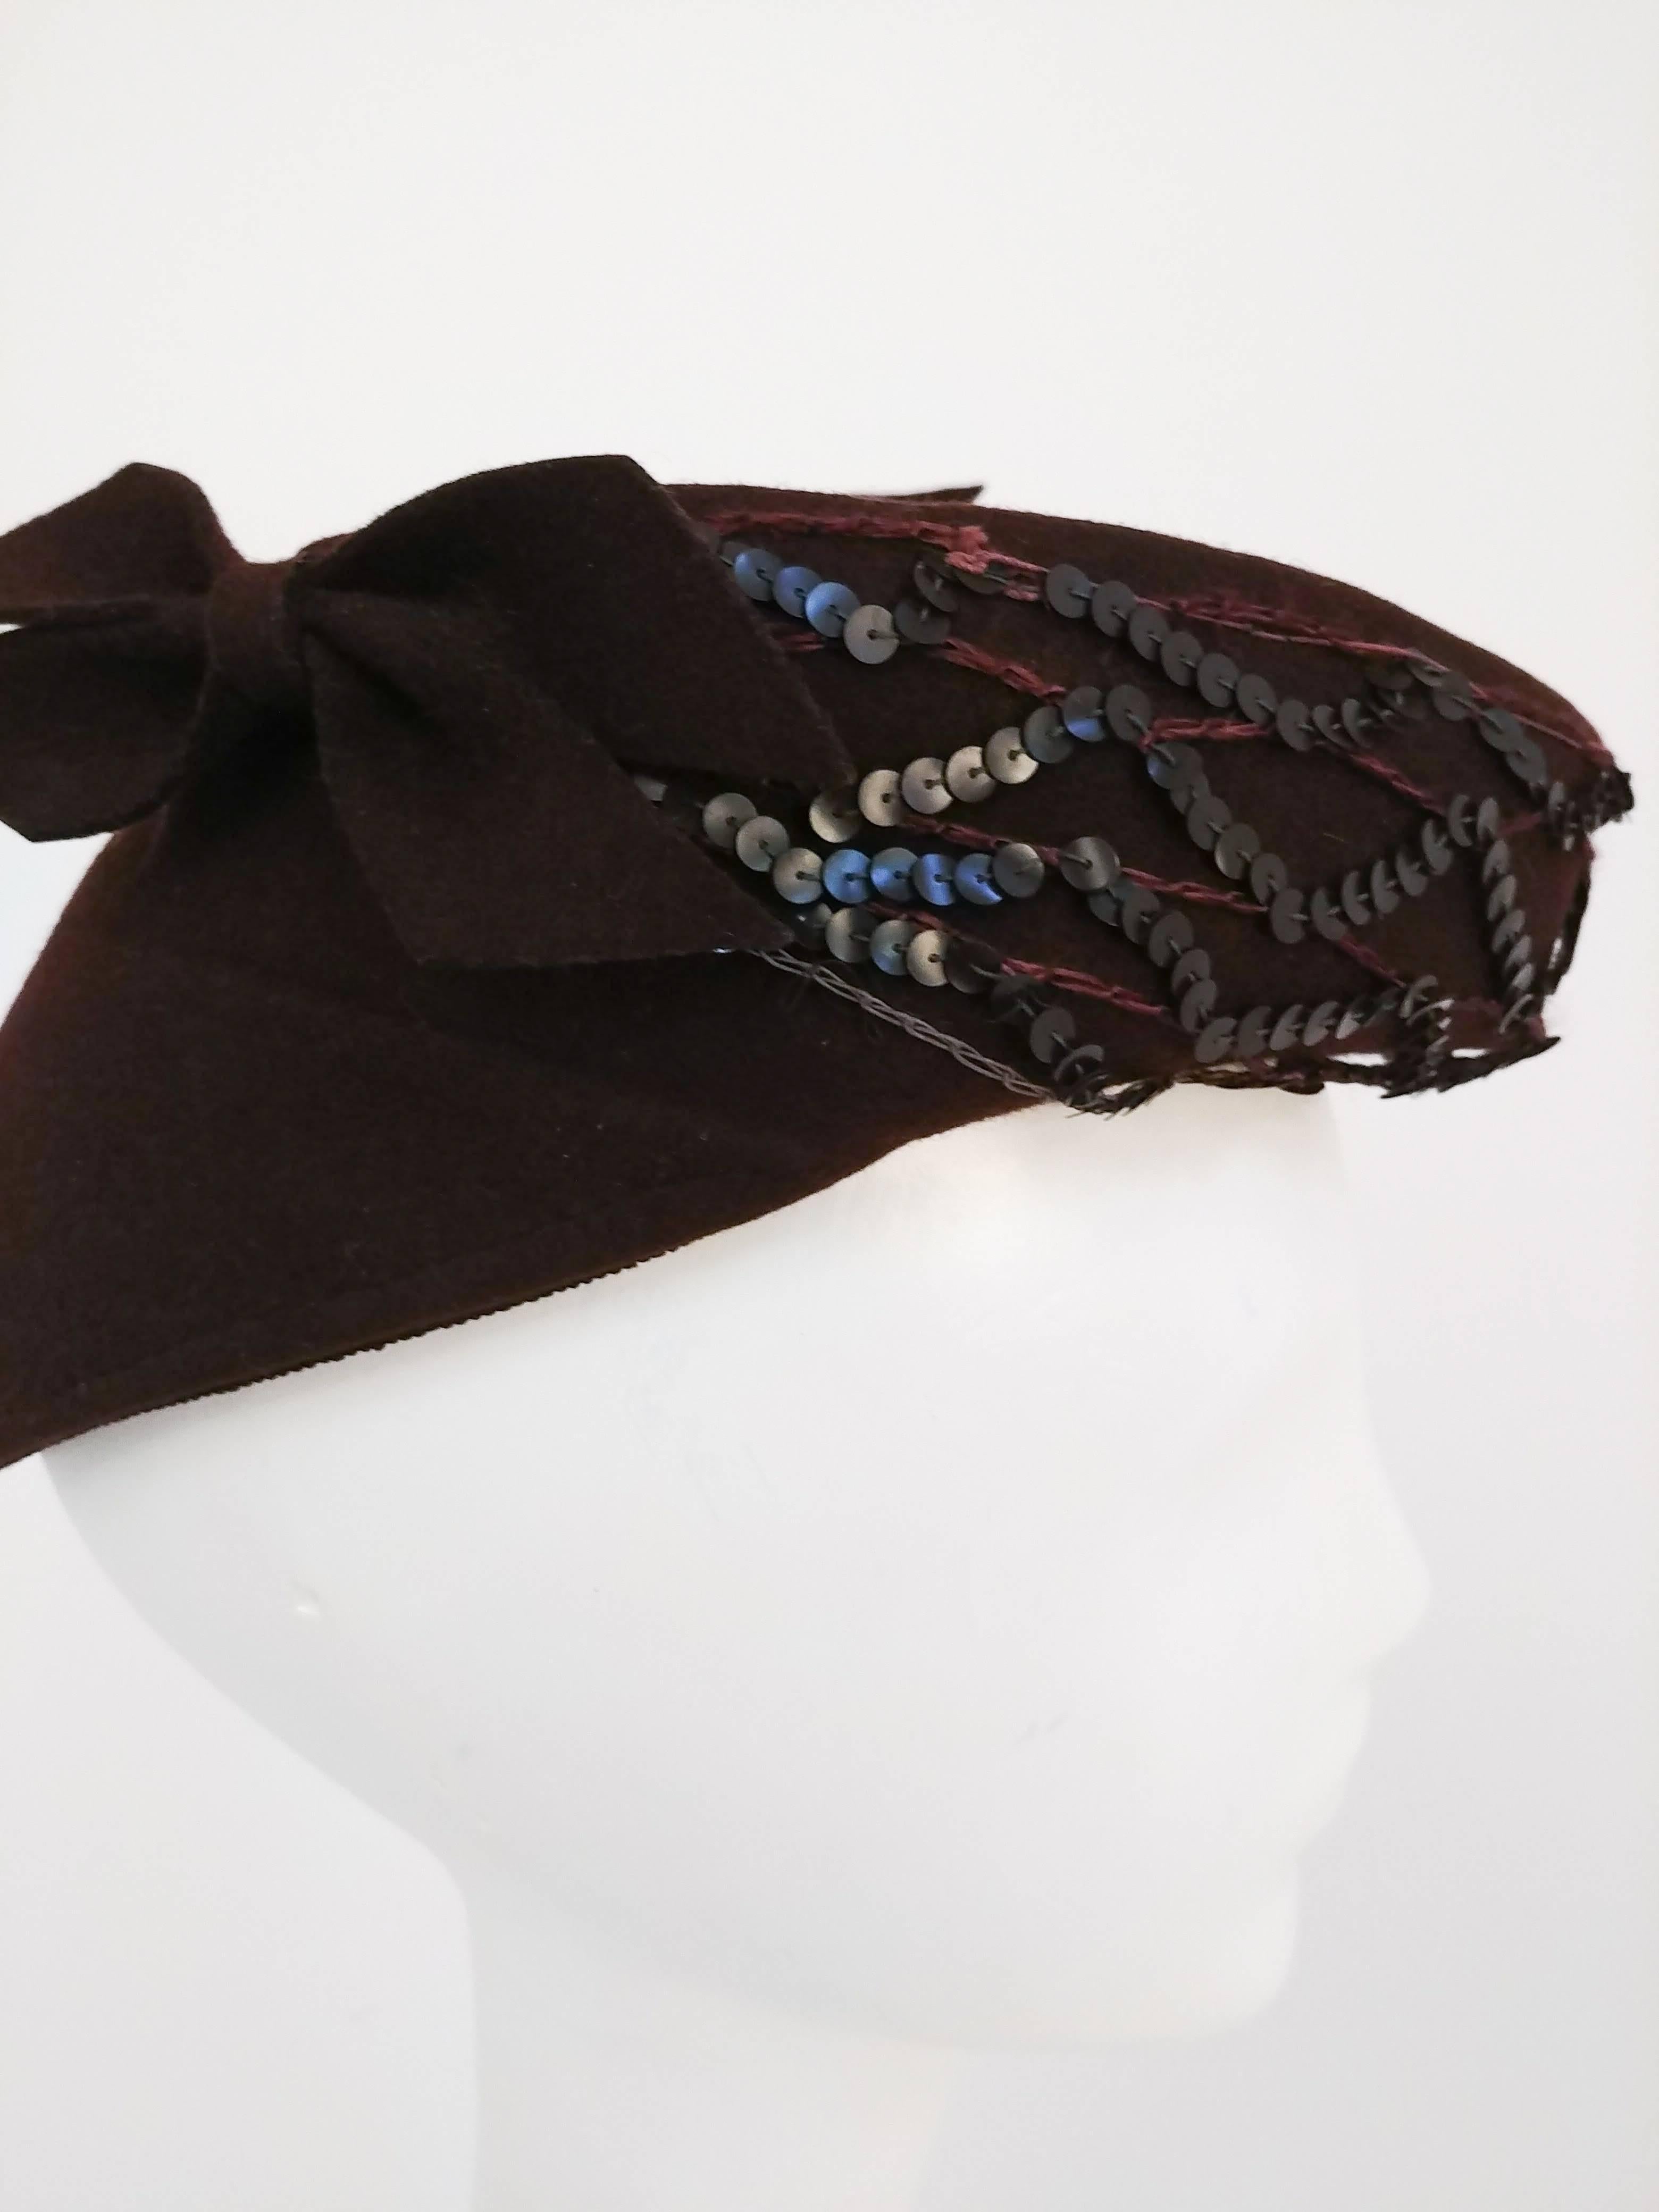 1940s Brown Wool Felt Hat w/ Sequins & Bows. Brown wool with sequin decoration and felt bows. 22 3/4 circumference. 